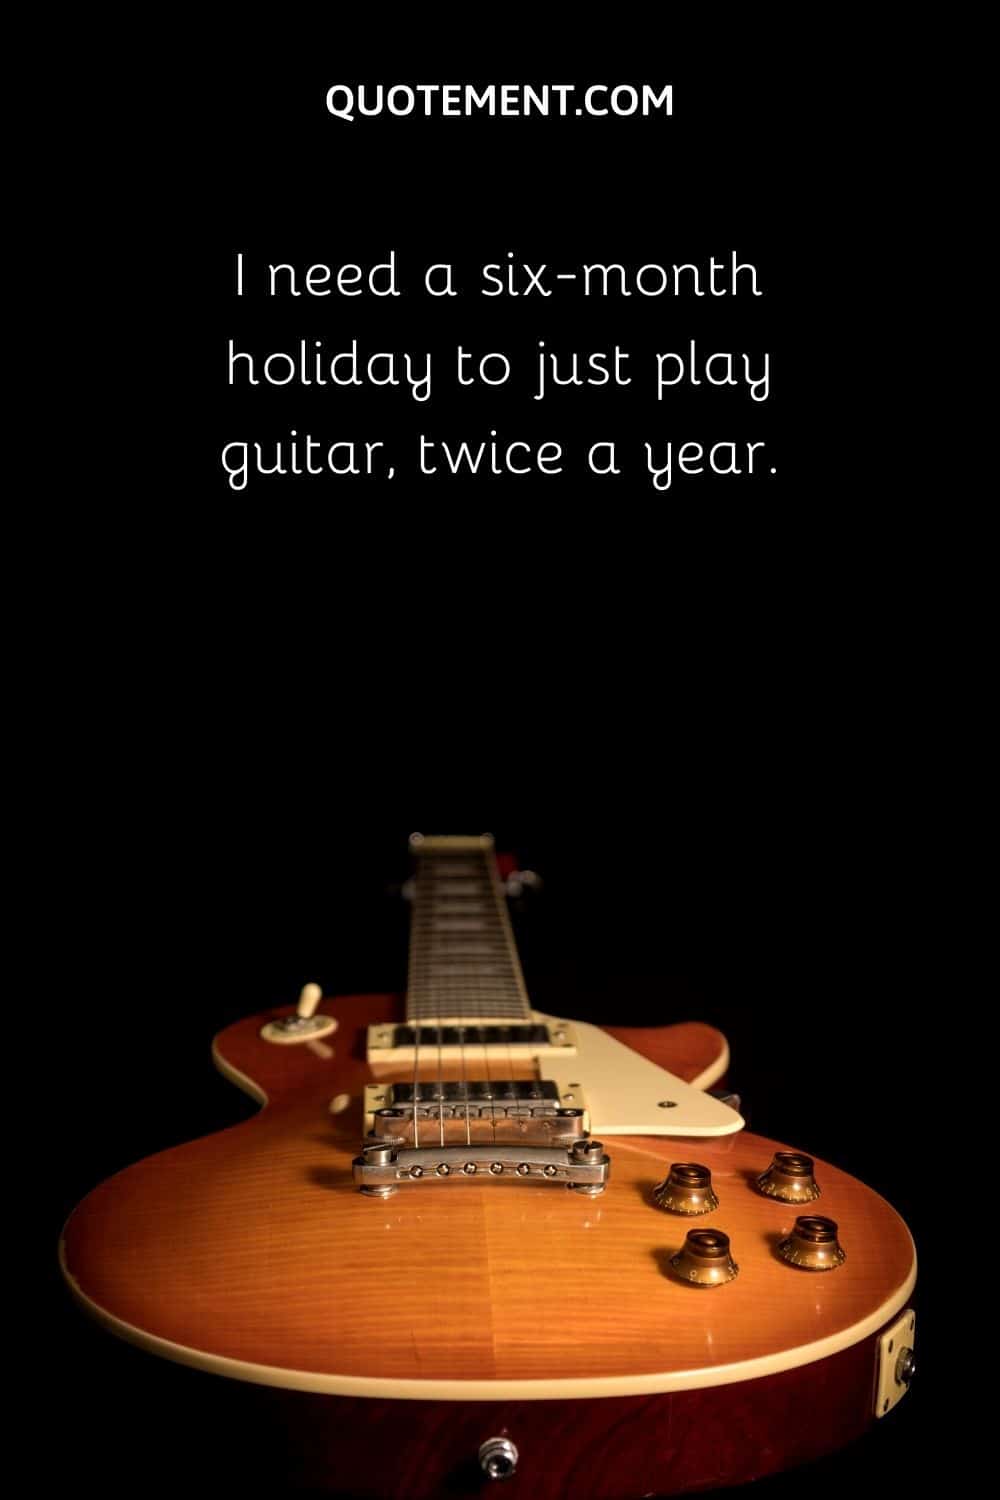 I need a six-month holiday to just play guitar, twice a year.